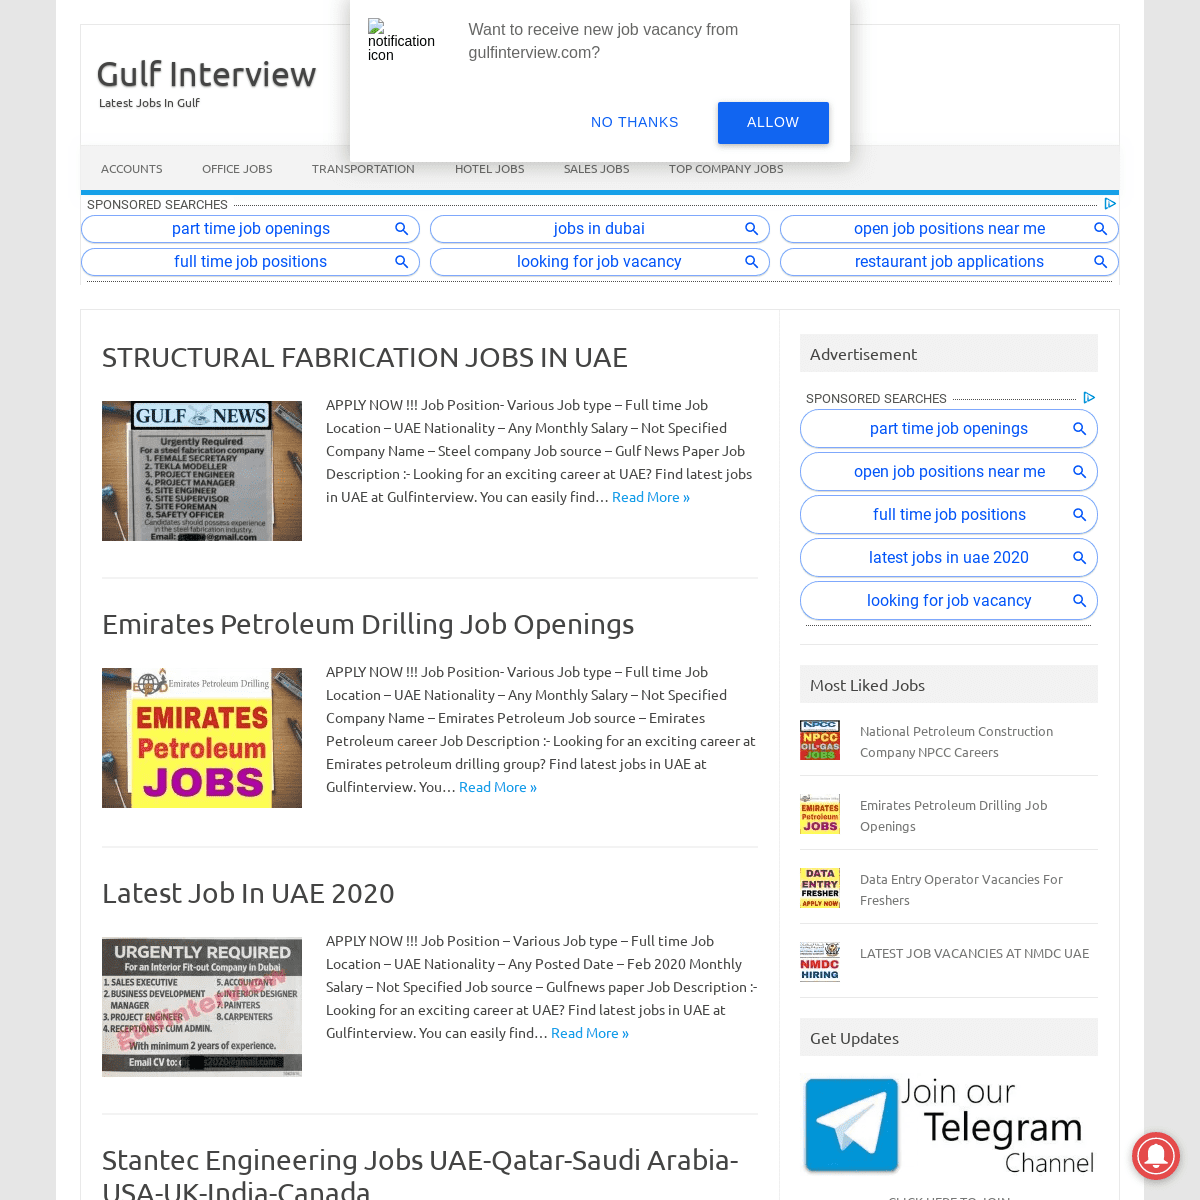 A complete backup of gulfinterview.com